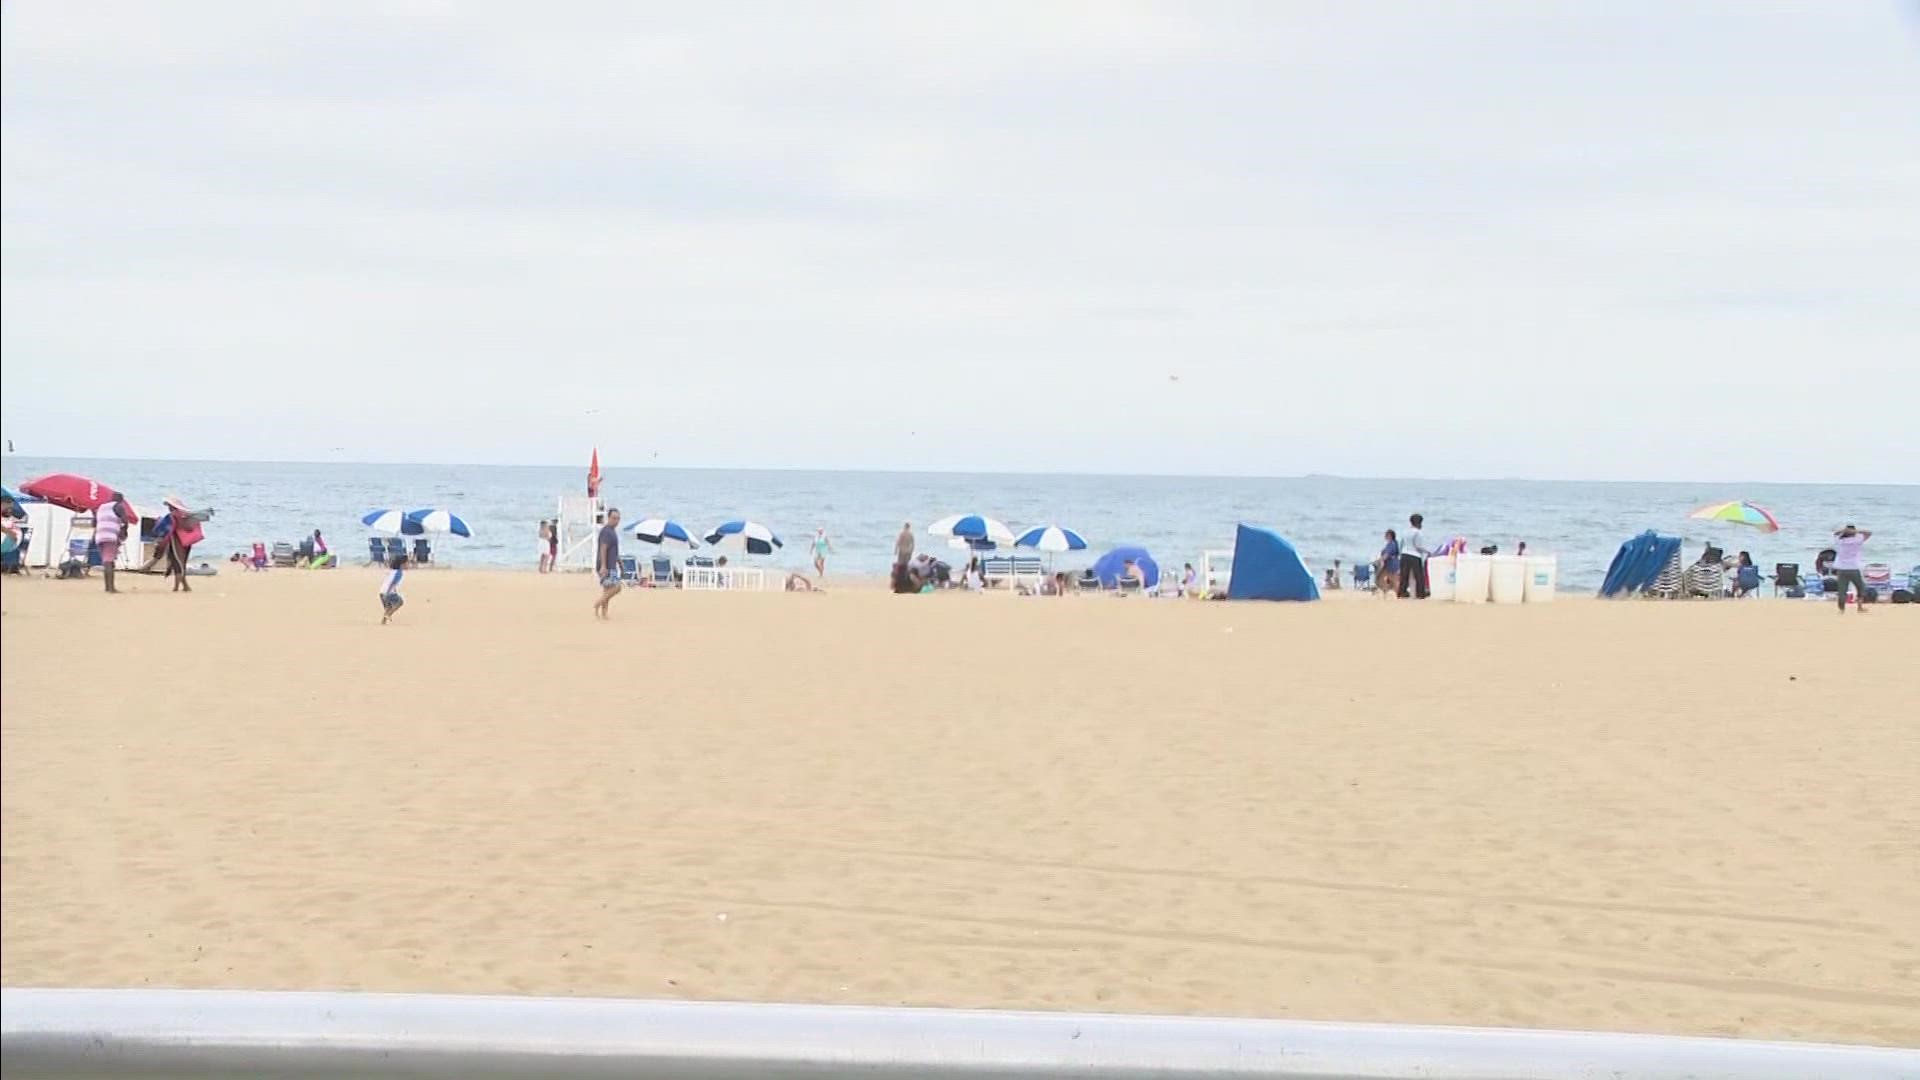 Crowds enjoy Virginia Beach Oceanfront for Labor Day